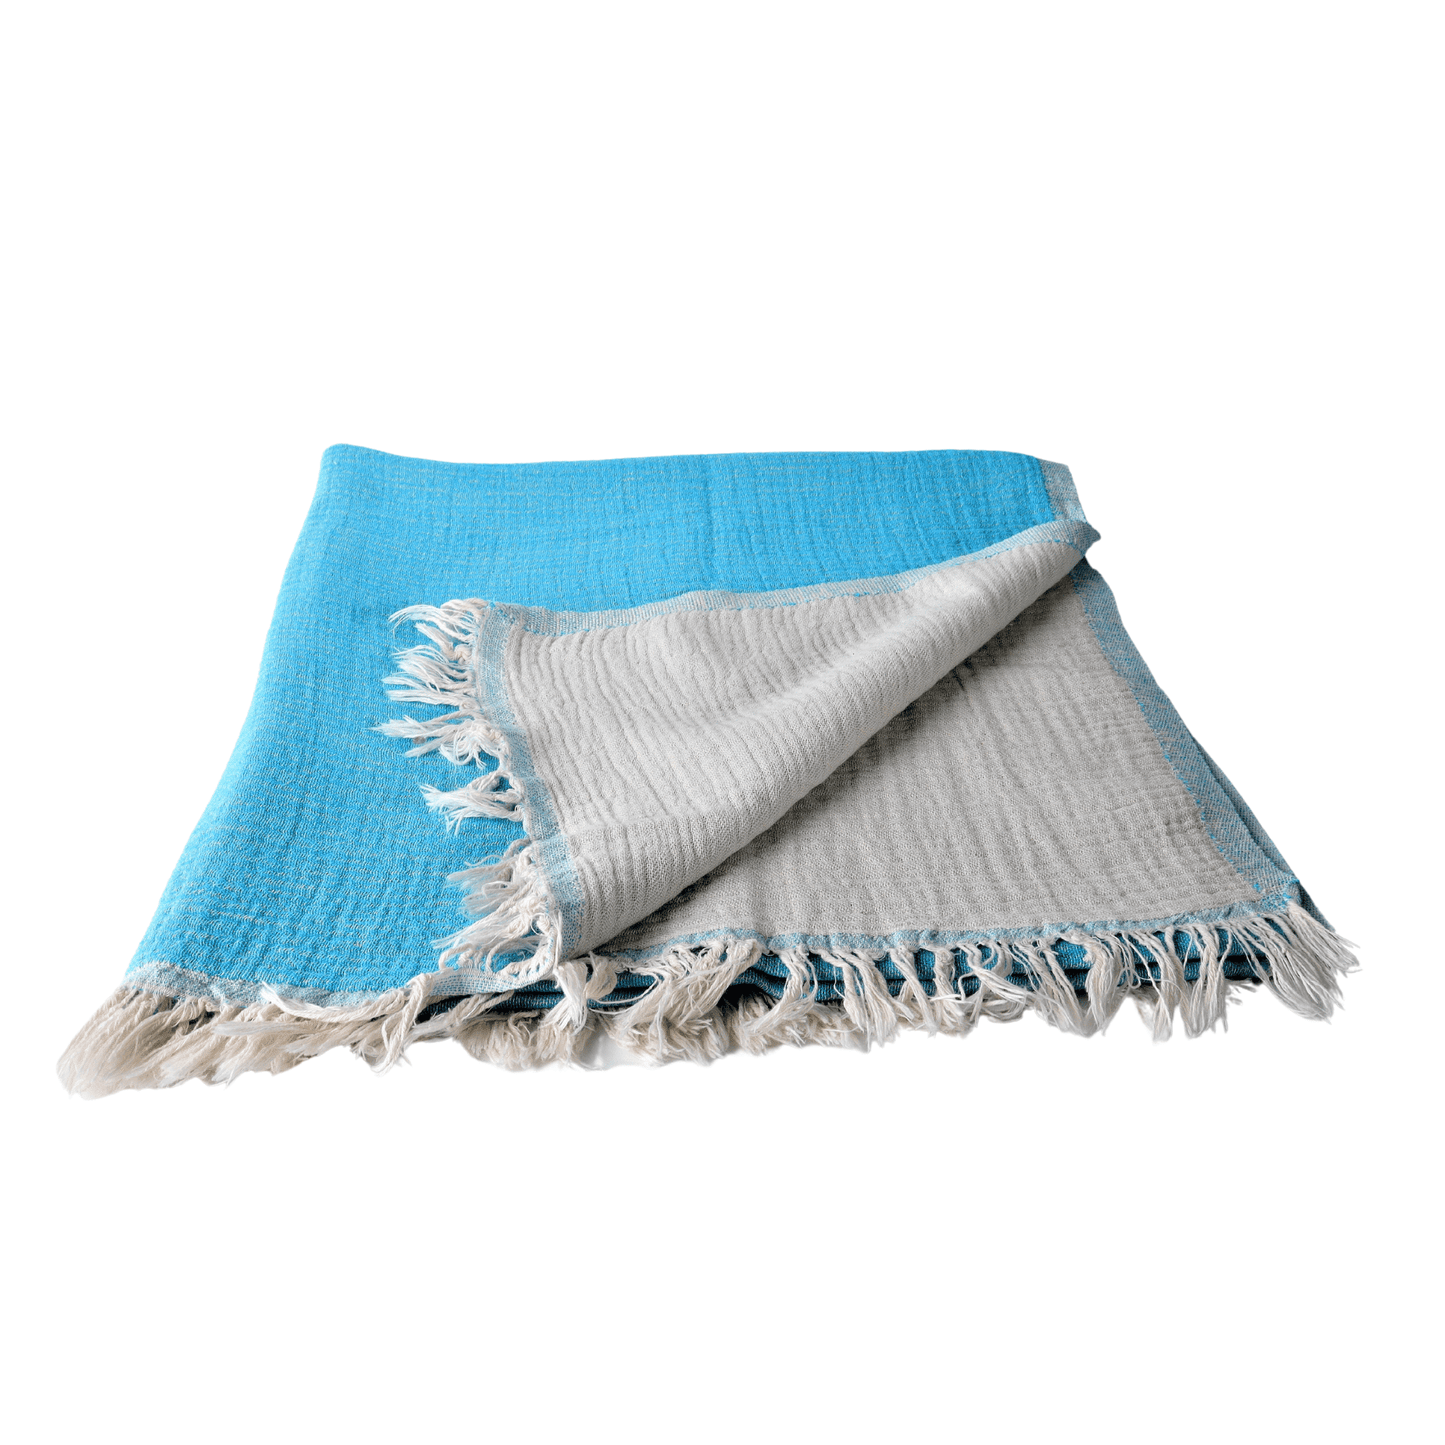 Muslin Towels for Adults turquoise 4